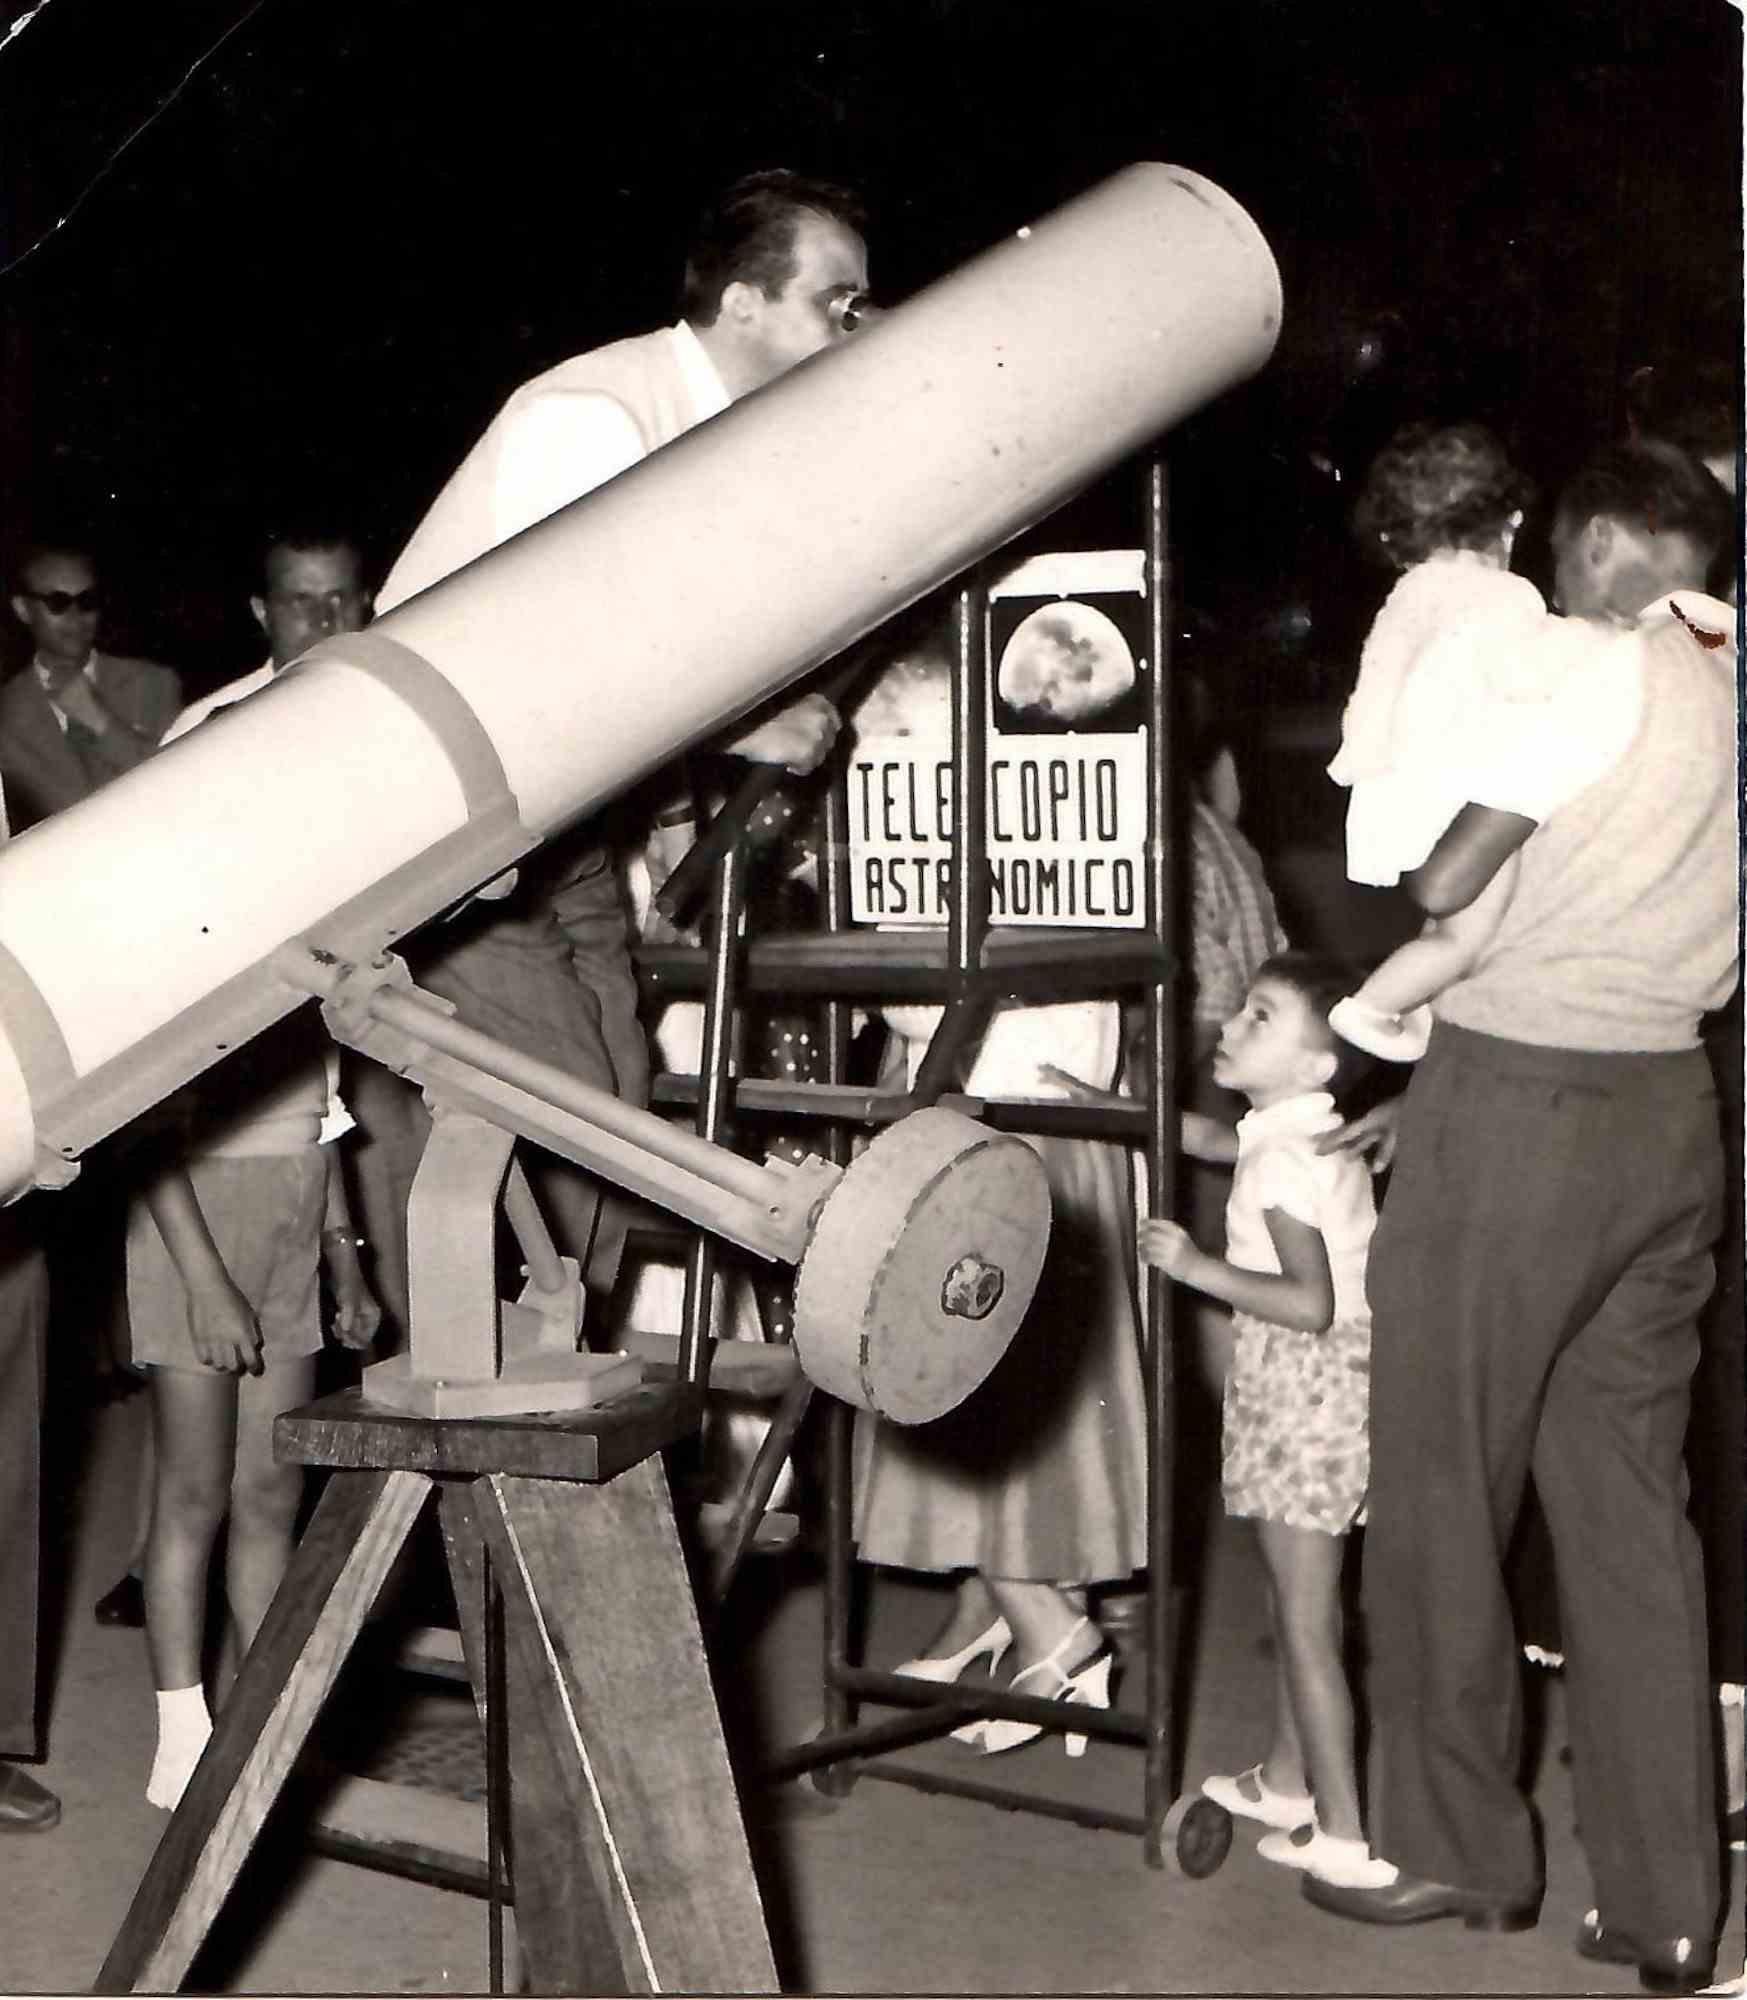 Unknown Black and White Photograph - Vintage Photo of a Telescope of Amateur Telescope - B/W photo - 1960s